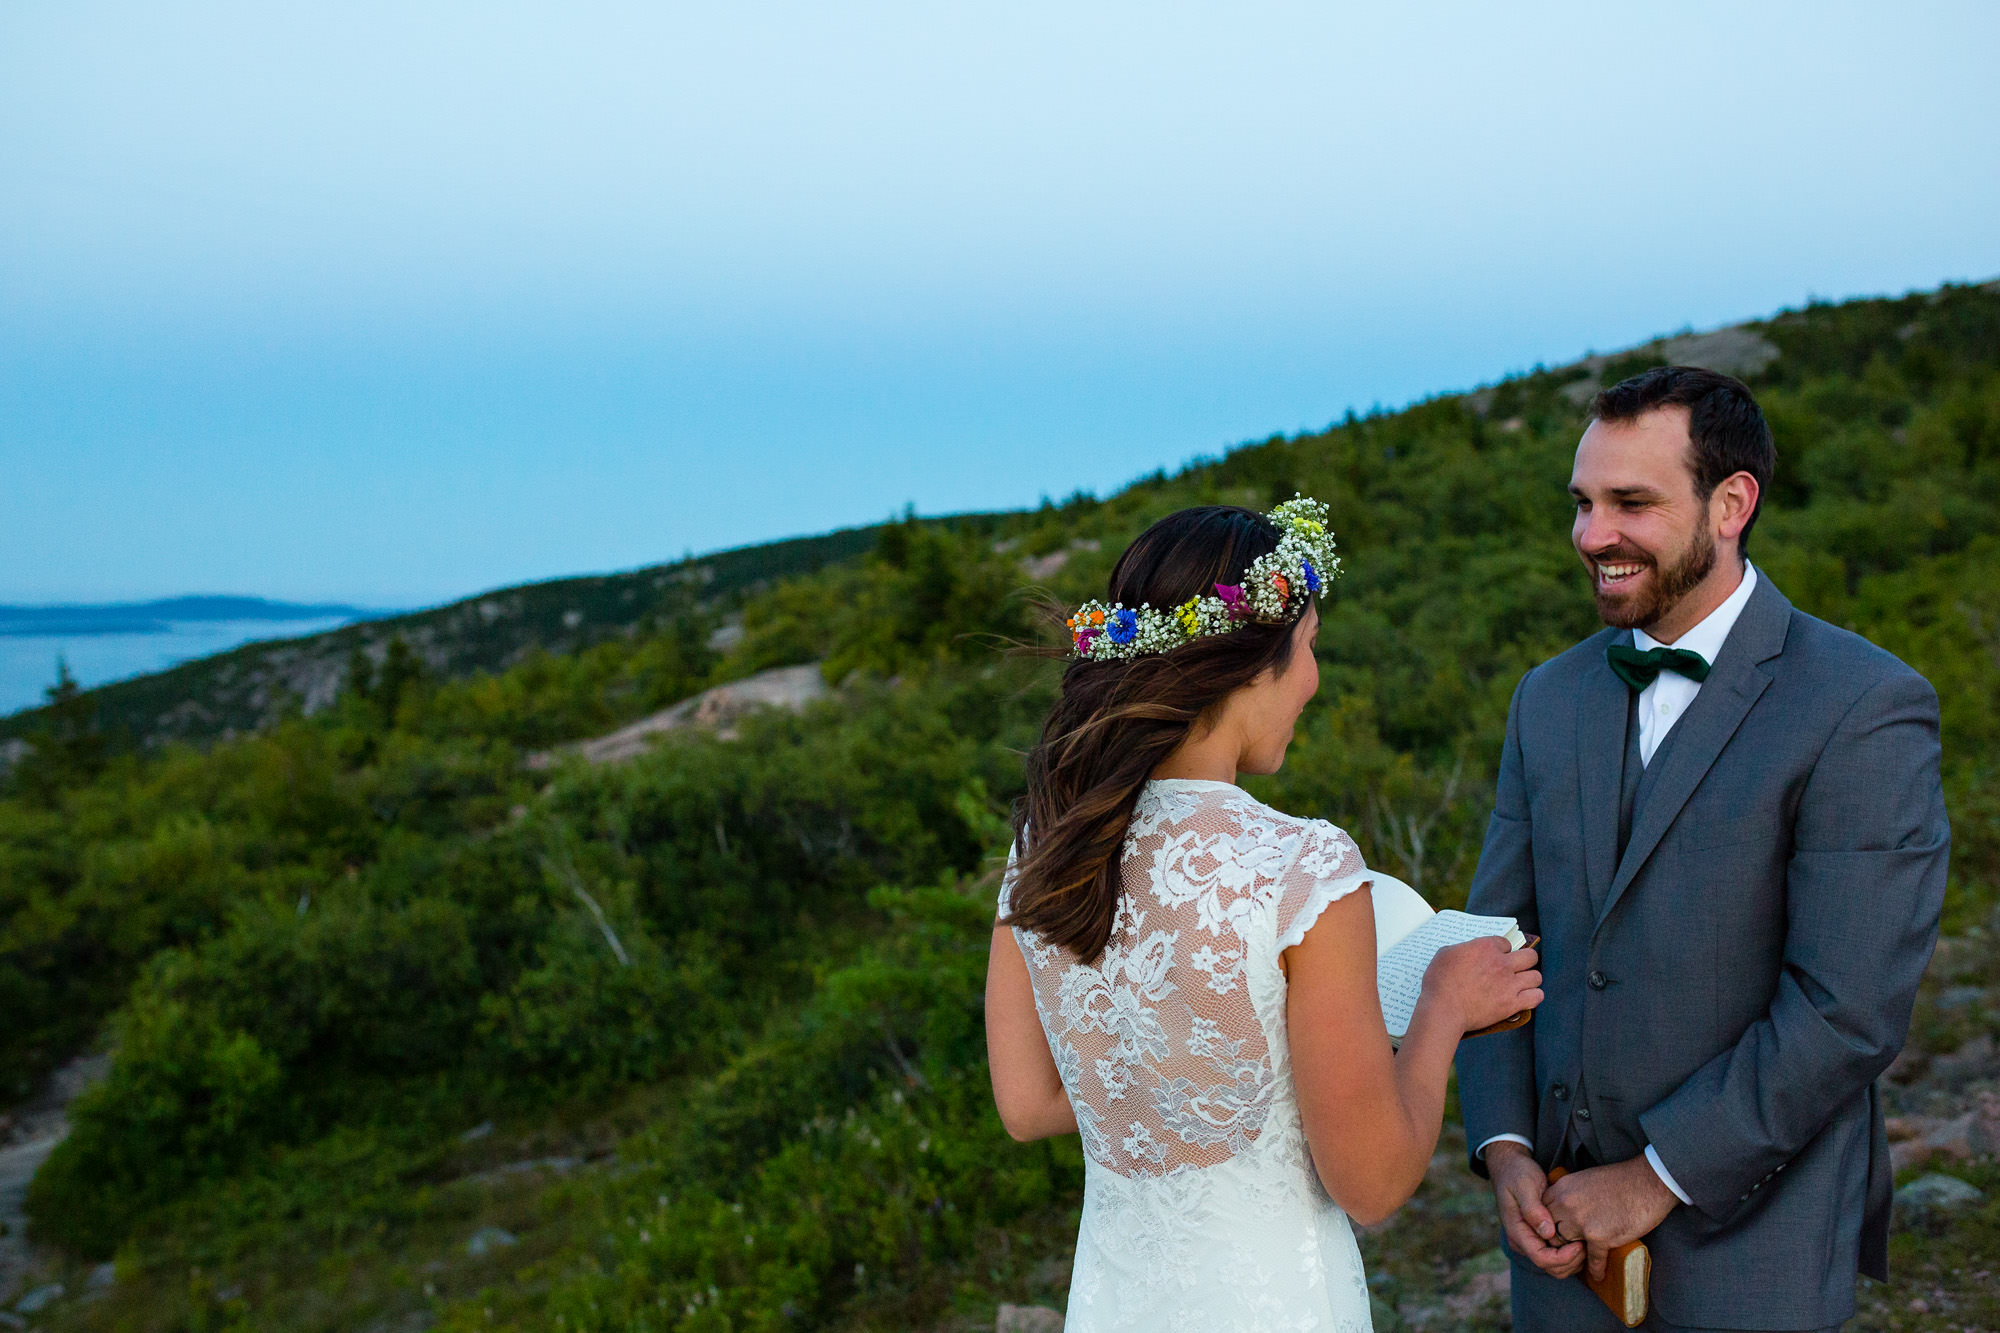 A bride and groom read vows during an emotional elopement on Cadillac Mountain